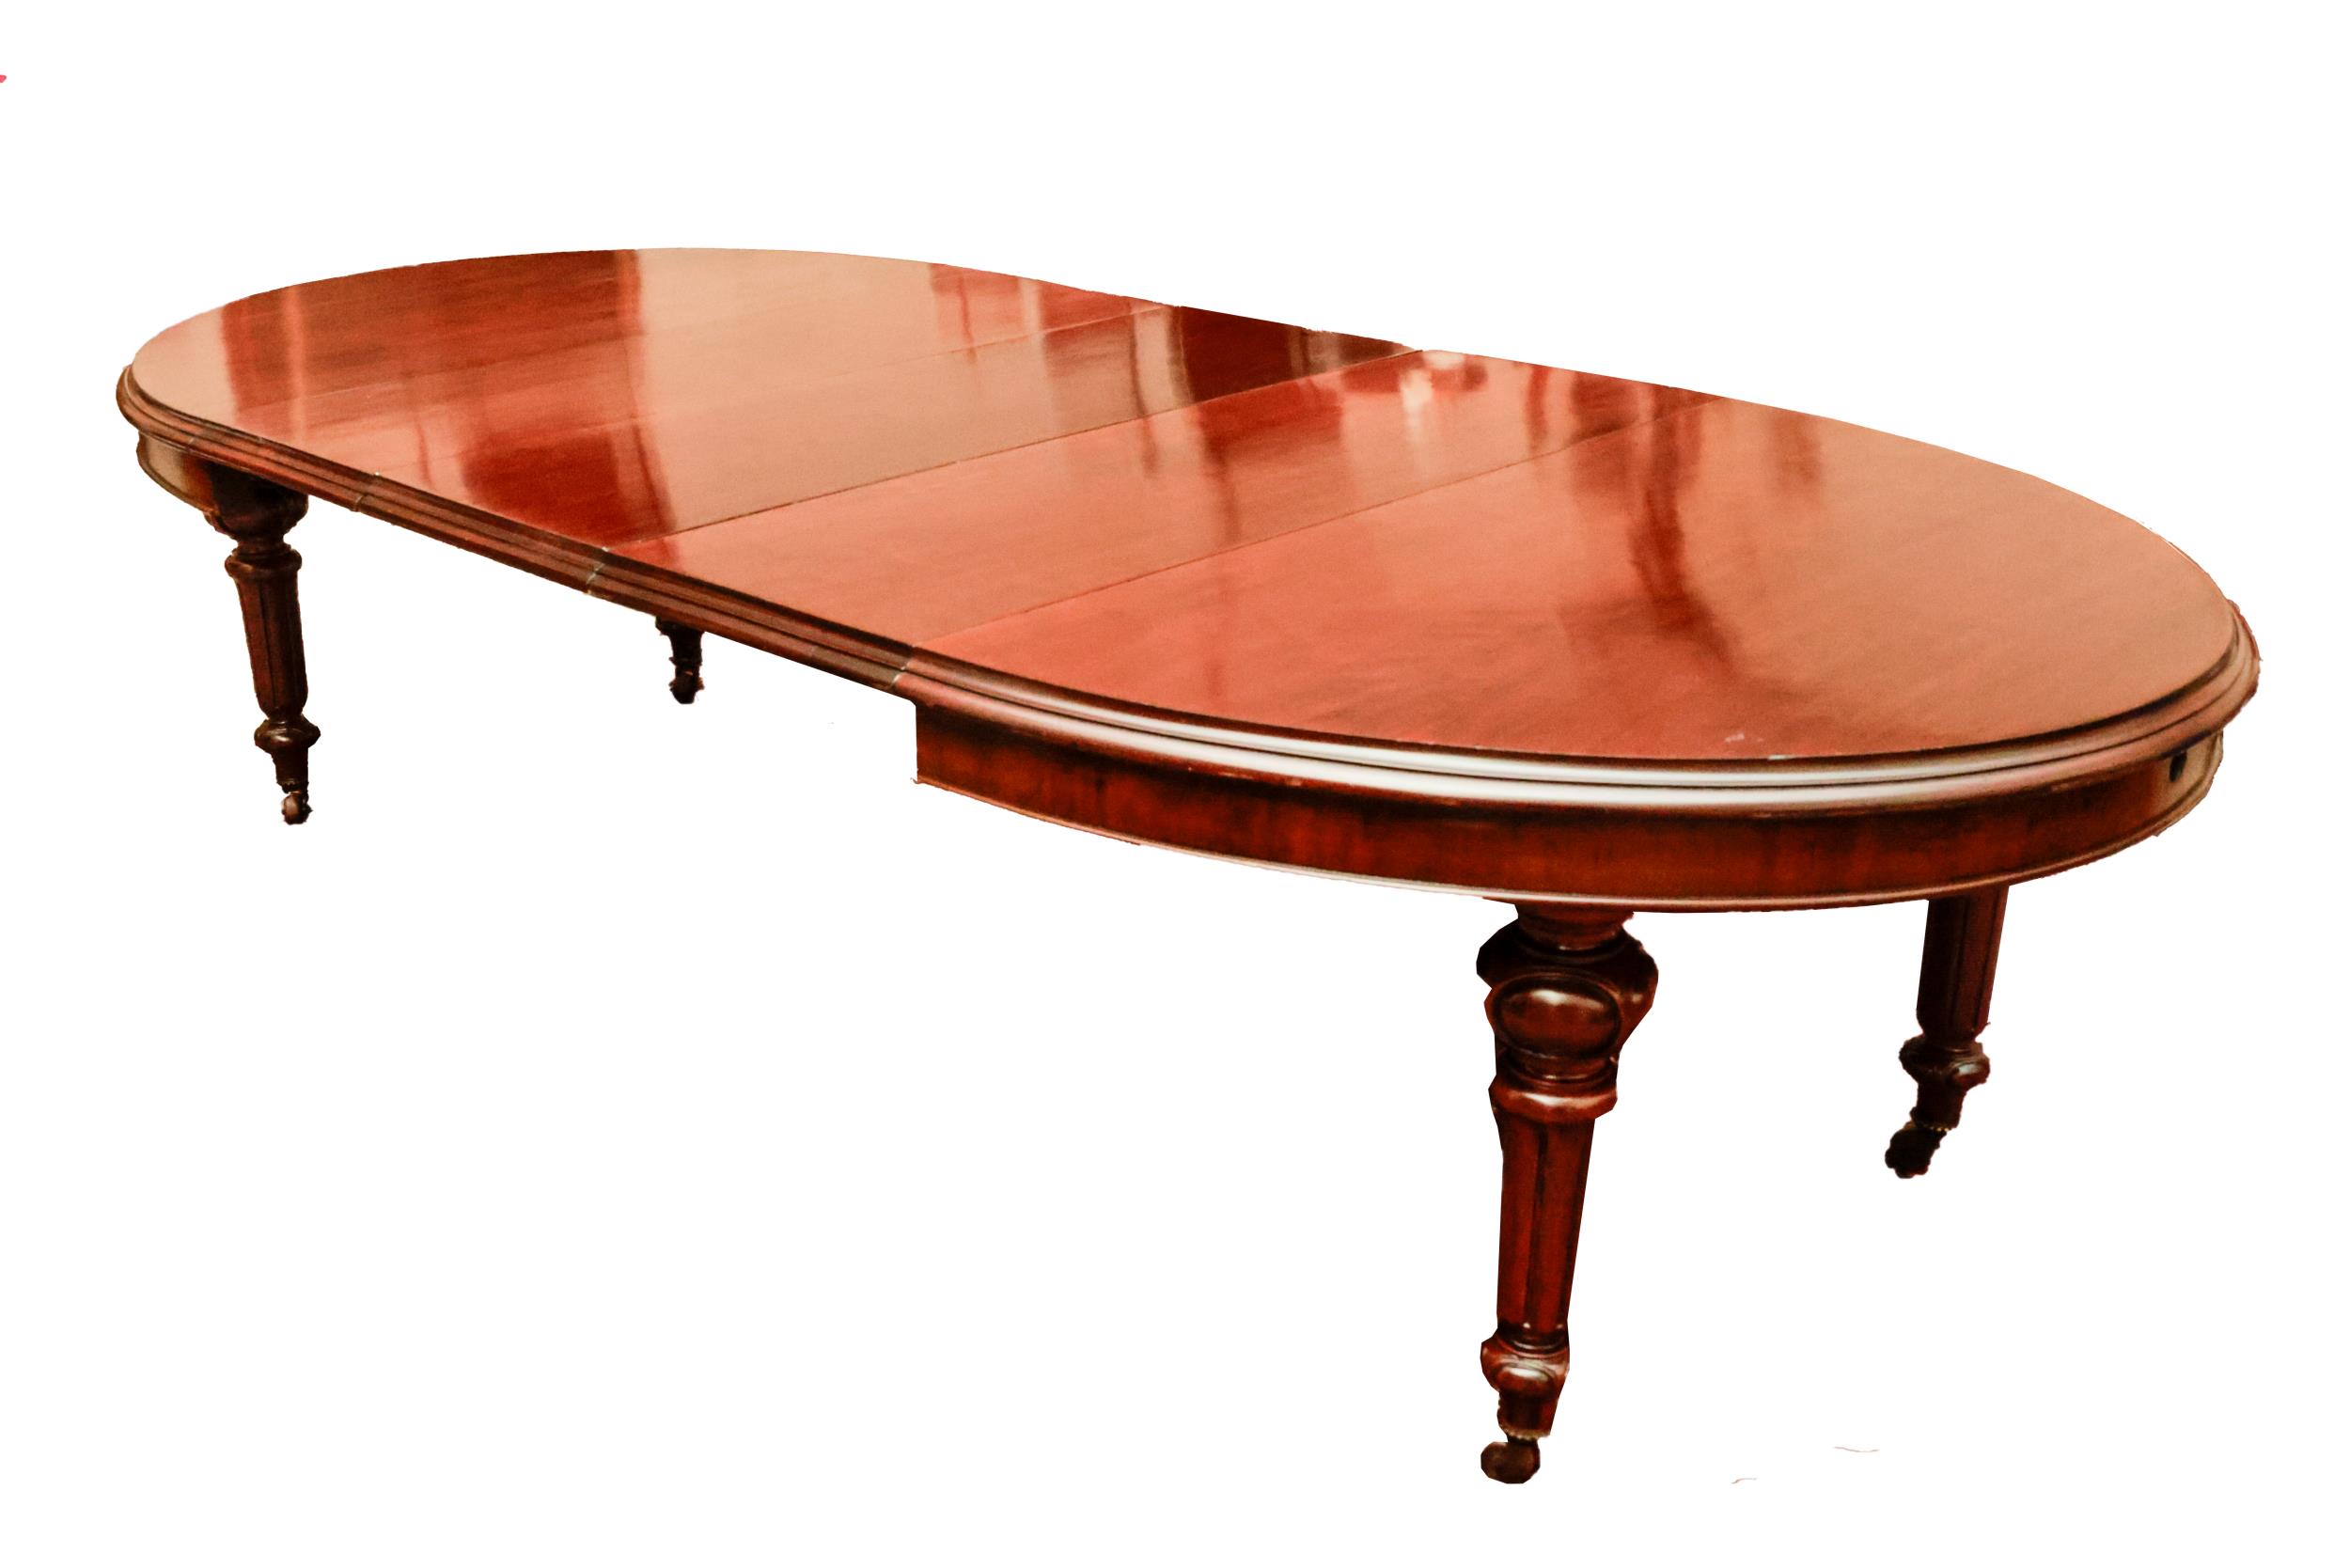 A fine quality Irish mahogany D end extendable Dining Table, attributed to Strahan of Dublin, with